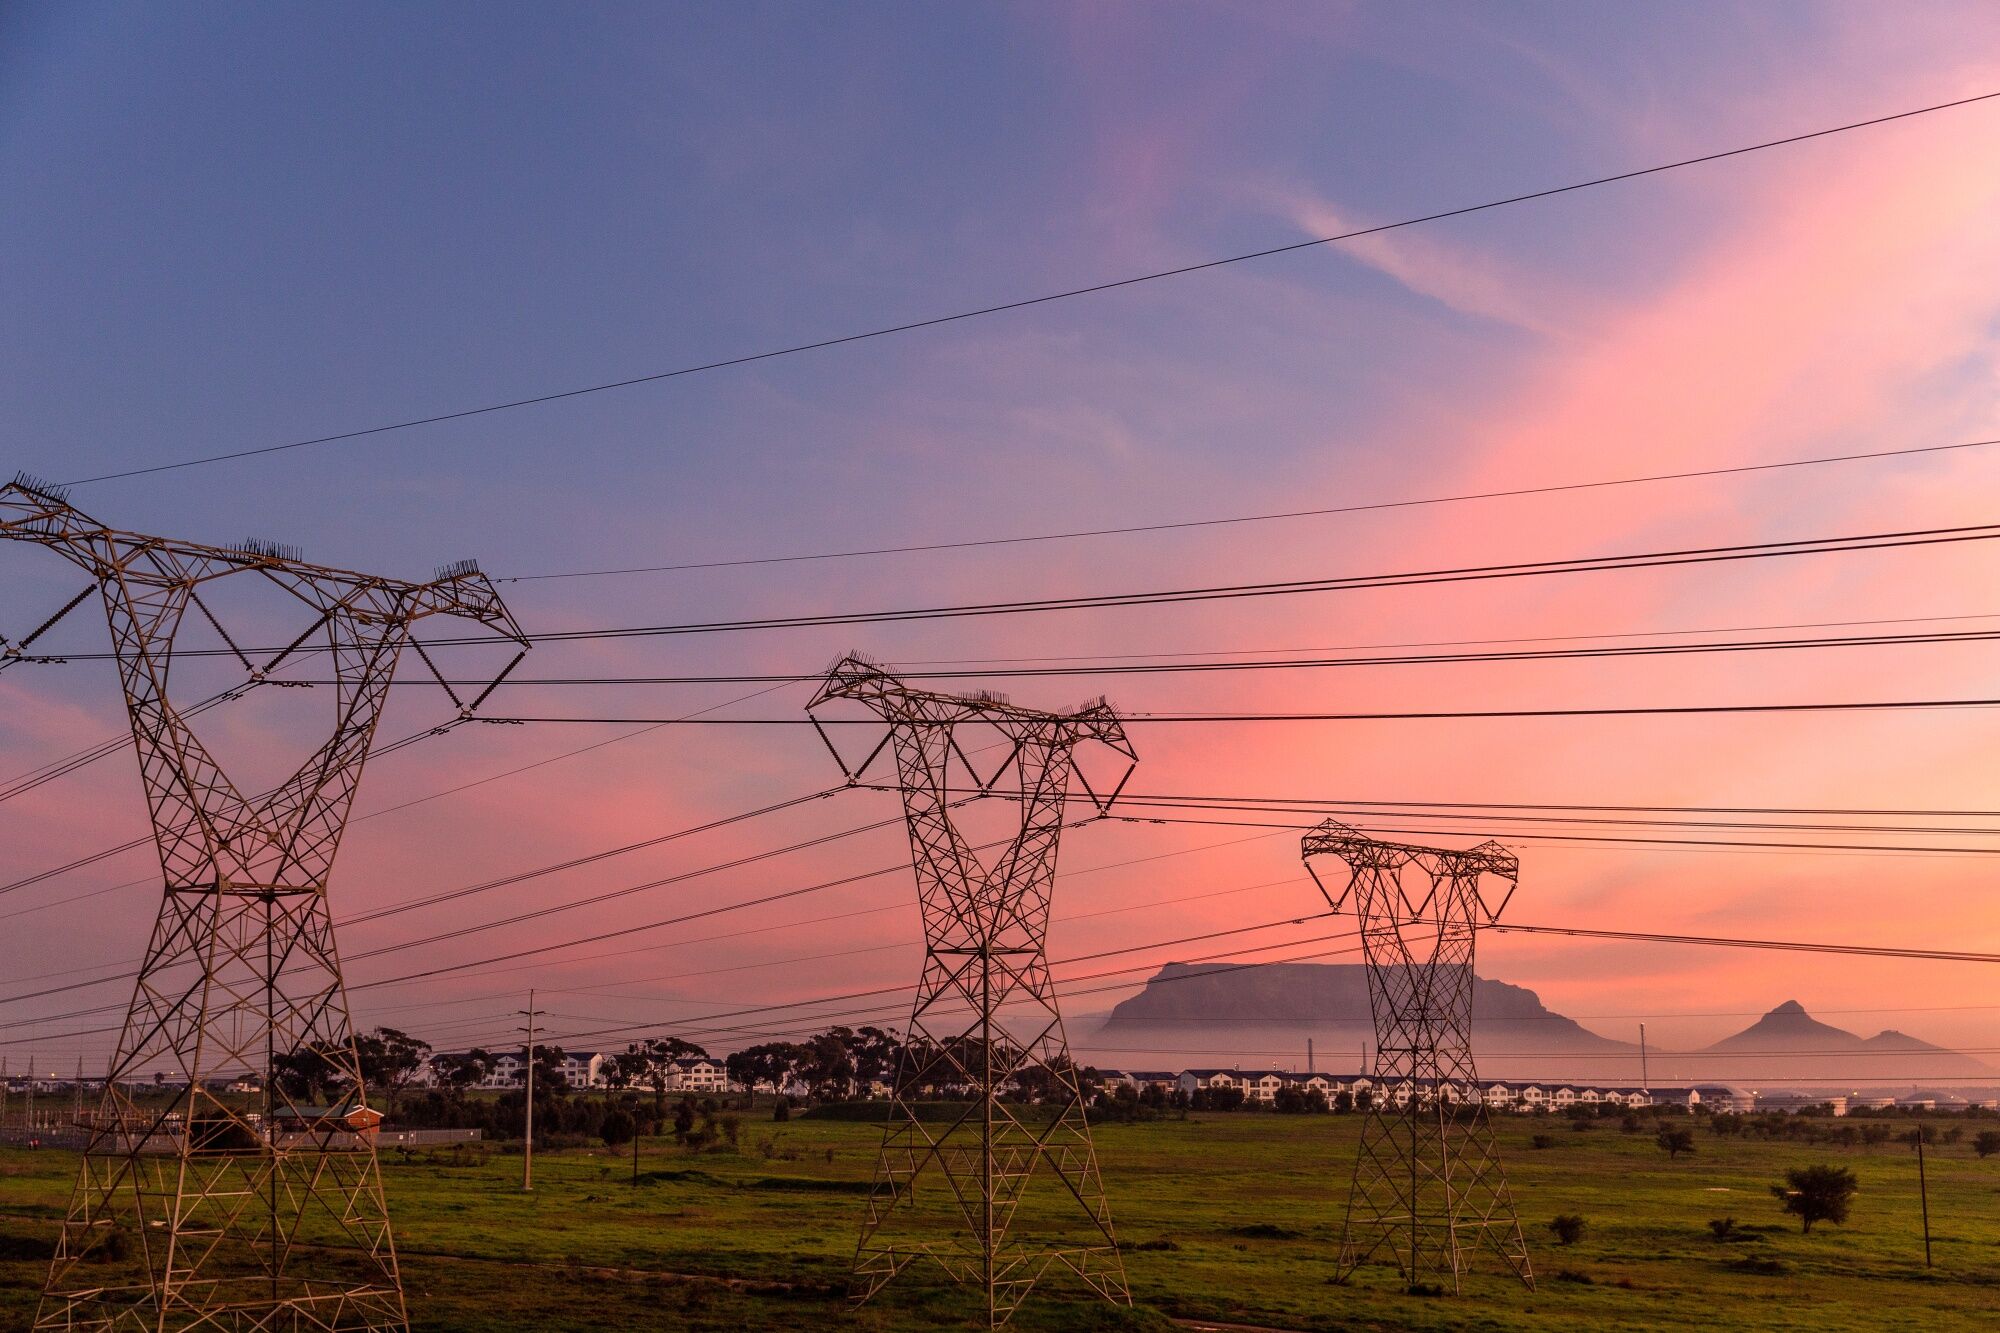 South Africa Blackouts What’s Behind the Latest Severe Outages